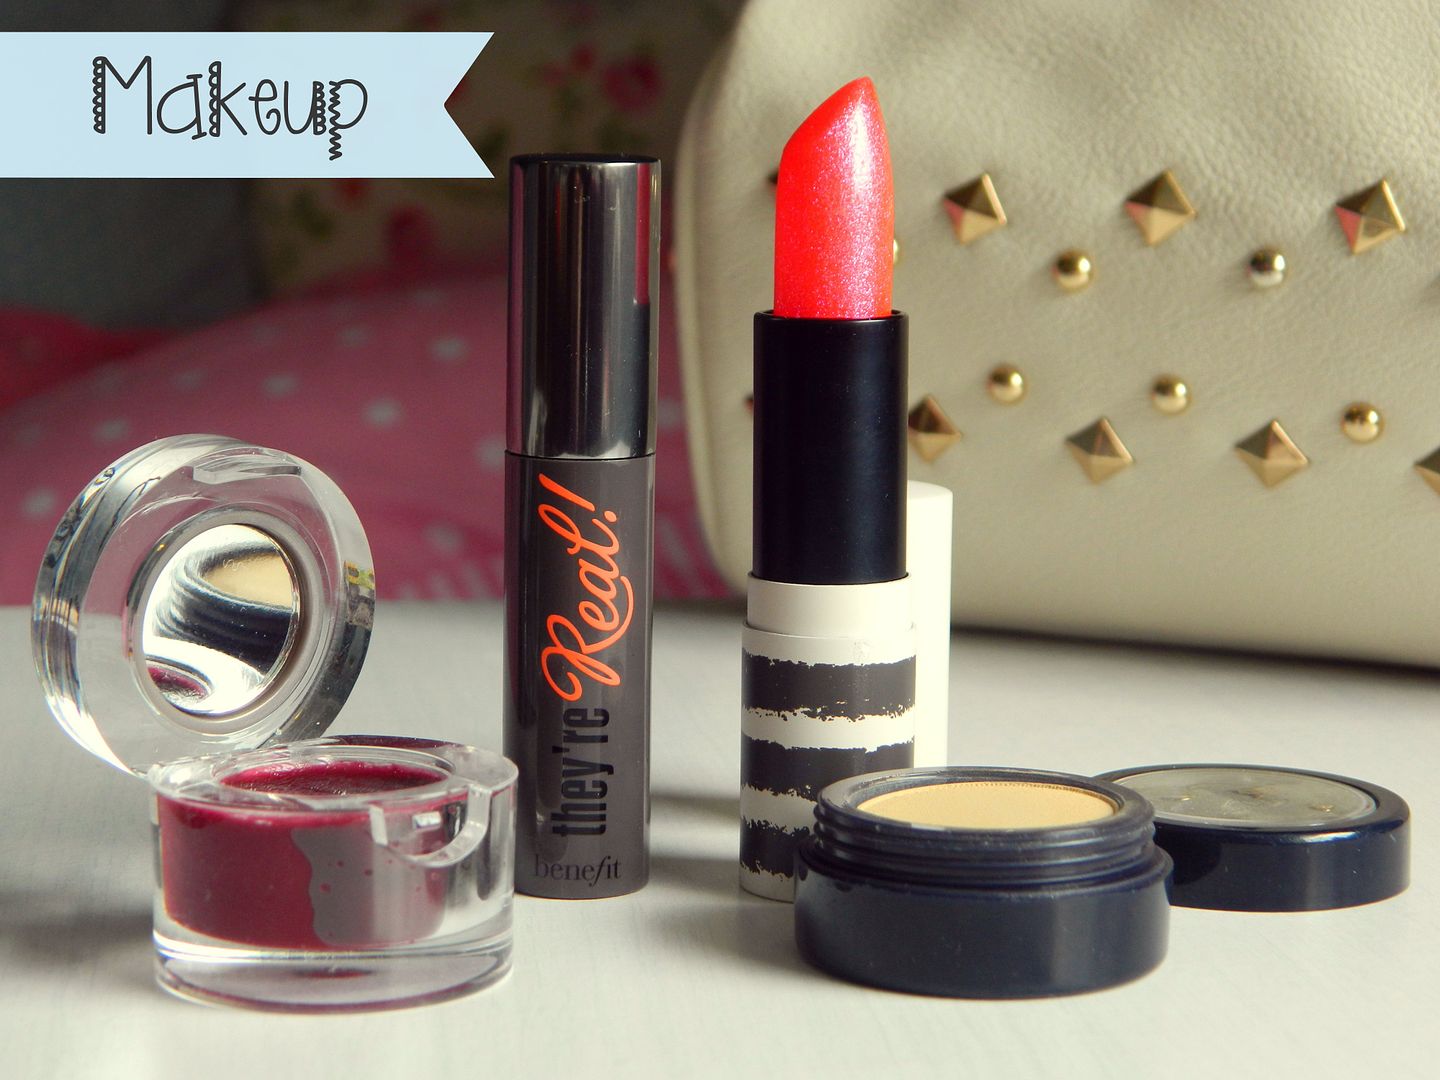 What's Inside My Beauty Bag Makeup Products Topshop Benefit Bloom Jane Iredale